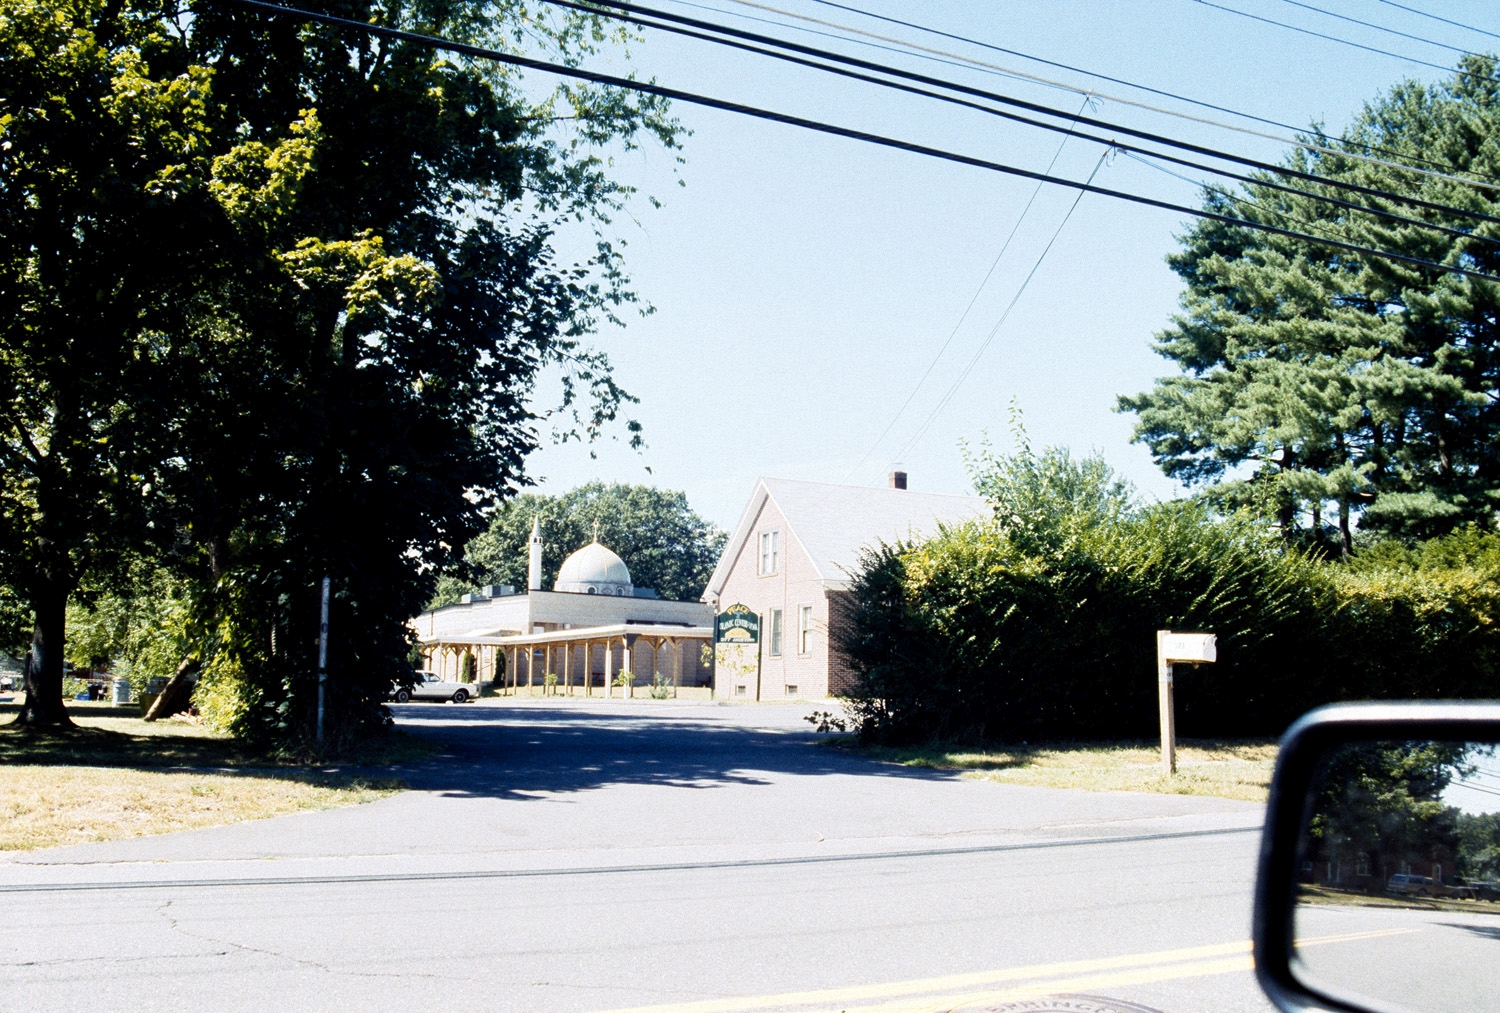 Islamic Society of Western Massachusetts - View from street, prior to expansion; the covered walkway and brick house are no longer extant